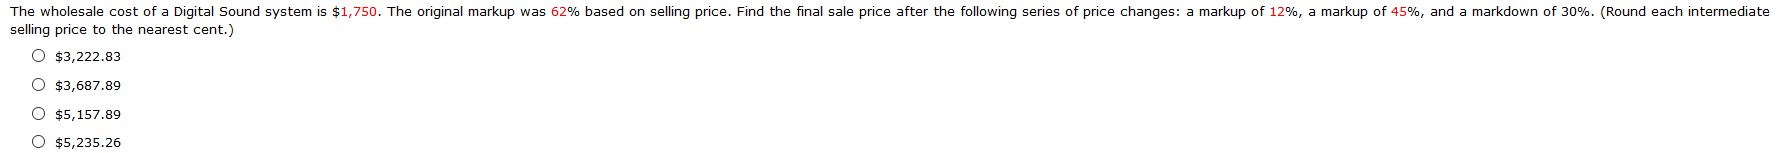 The wholesale cost of a Digital Sound system is $1,750. The original markup was 62% based on selling price. Find the final sale price after the following series of price changes: a markup of 12%, a markup of 45%, and a markdown of 30%. (Round each intermediate
selling price to the nearest cent.)
O $3,222.83
O $3,687.89
O $5,157.89
